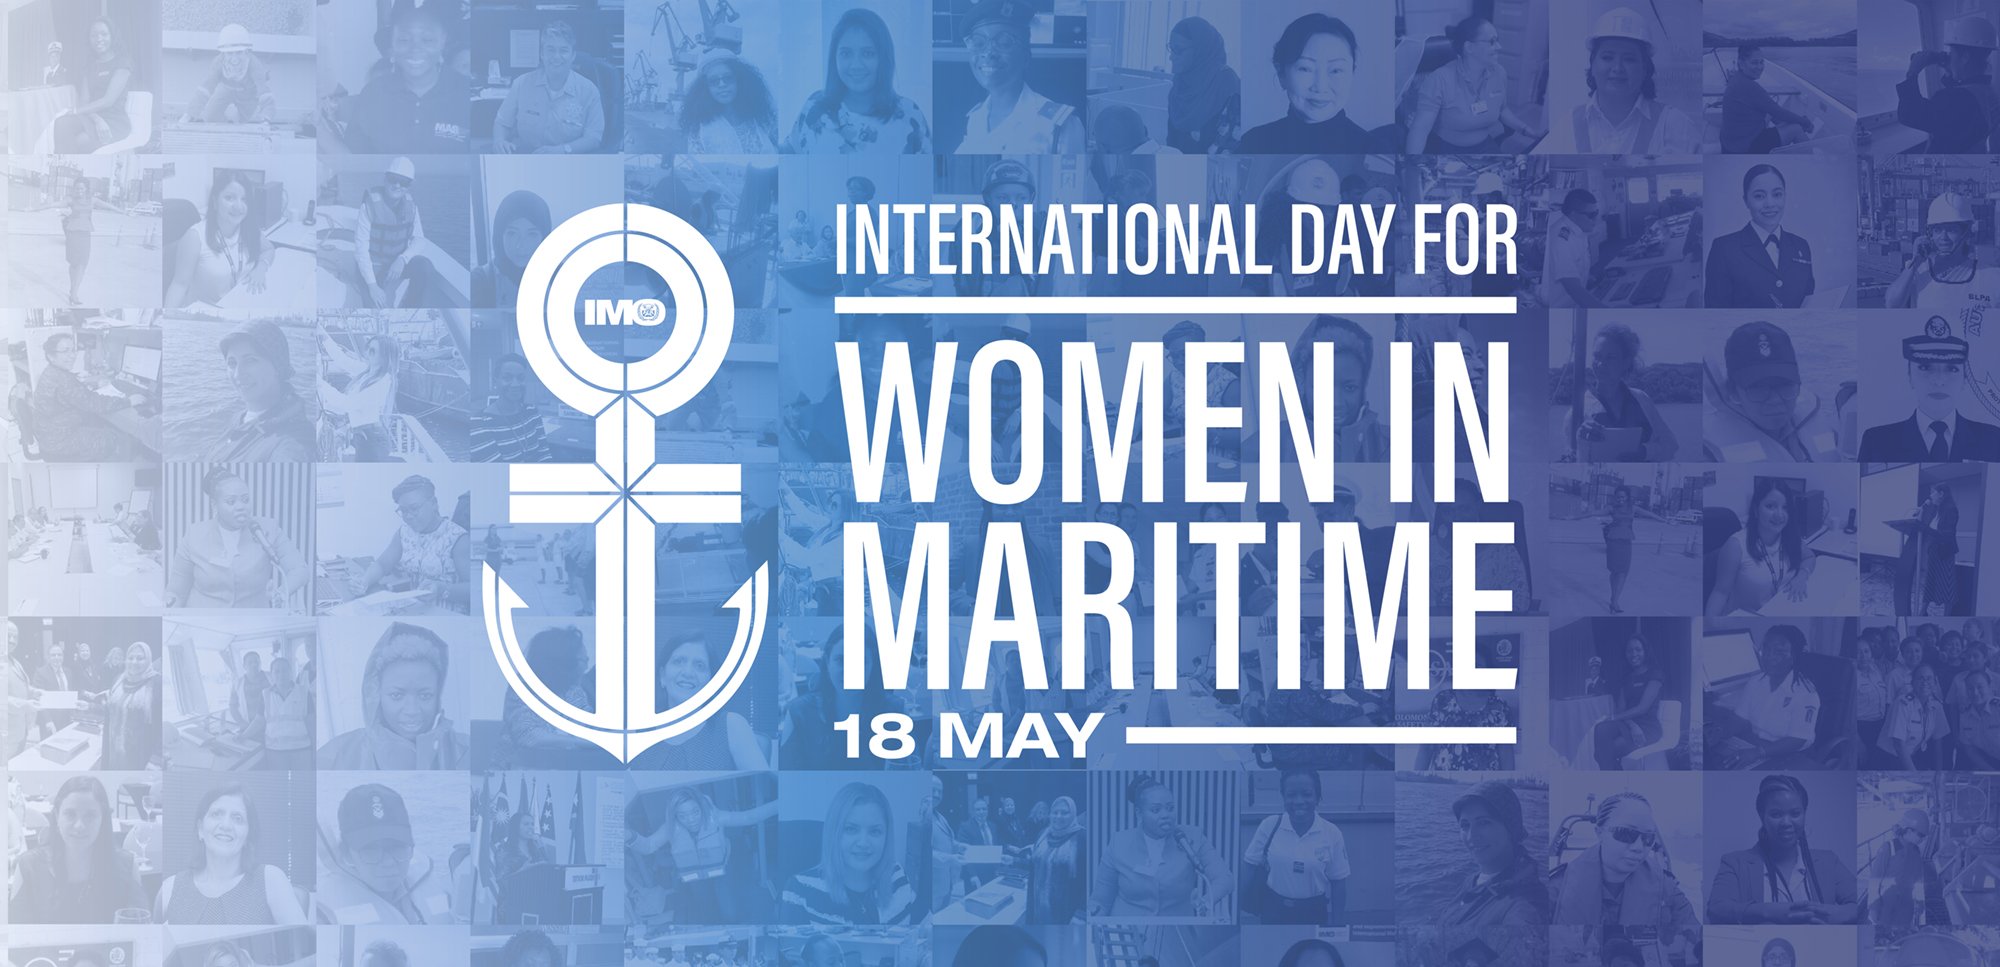 IMO organises conference ‘Mobilizing networks for gender equality’ on International Day for Women in Maritime